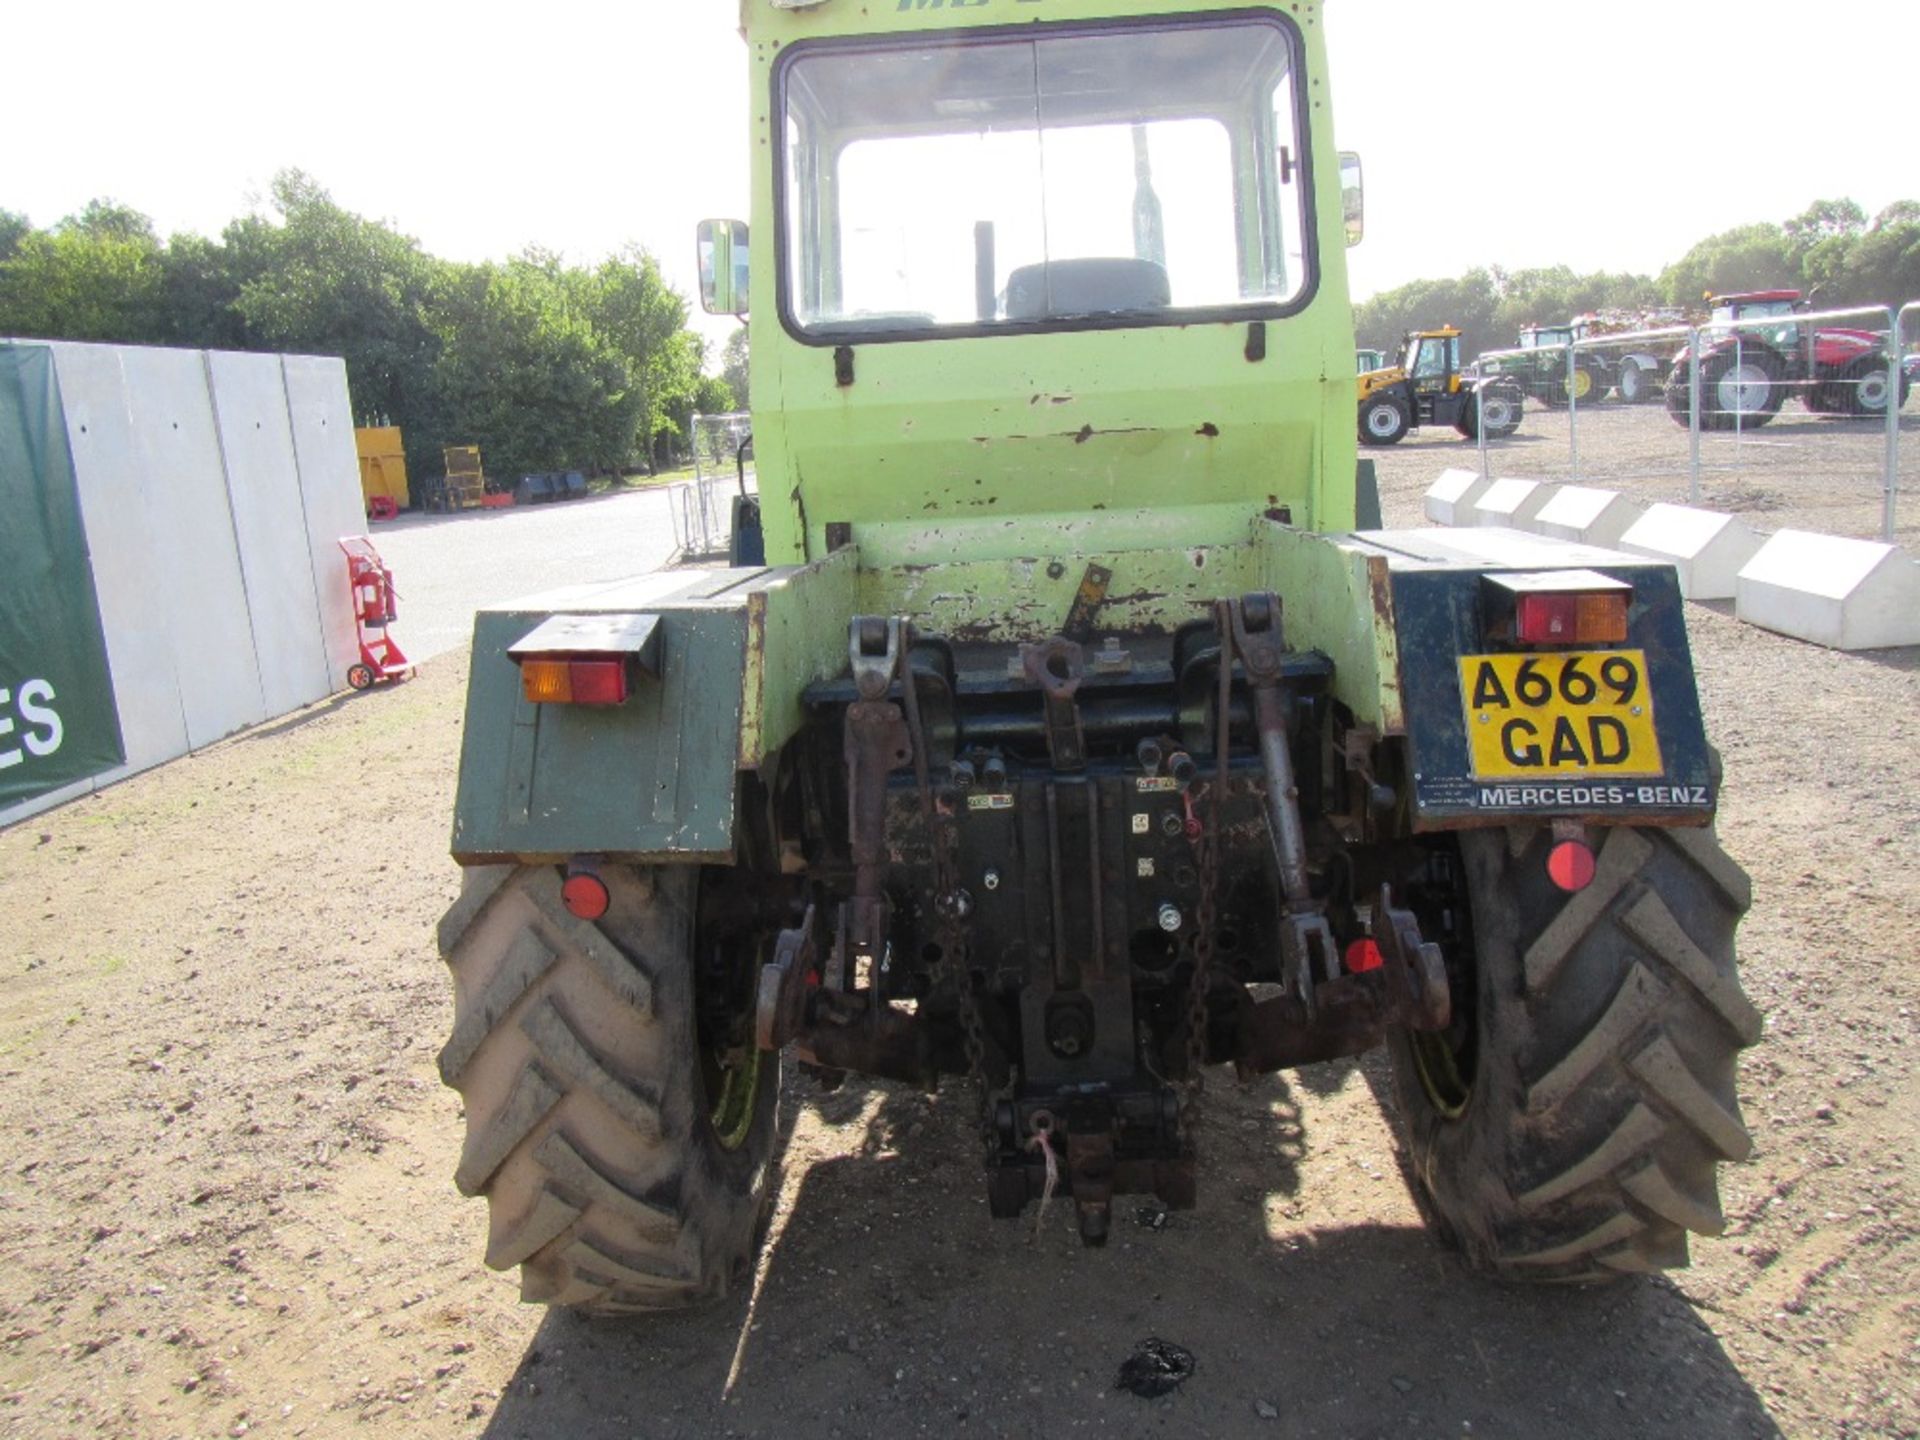 MB Trac 1000 with Cummins Engine, PTO Linkage, PUH, 16.9-26 Tyres Reg. No. A669 GAD Ser No - Image 6 of 16